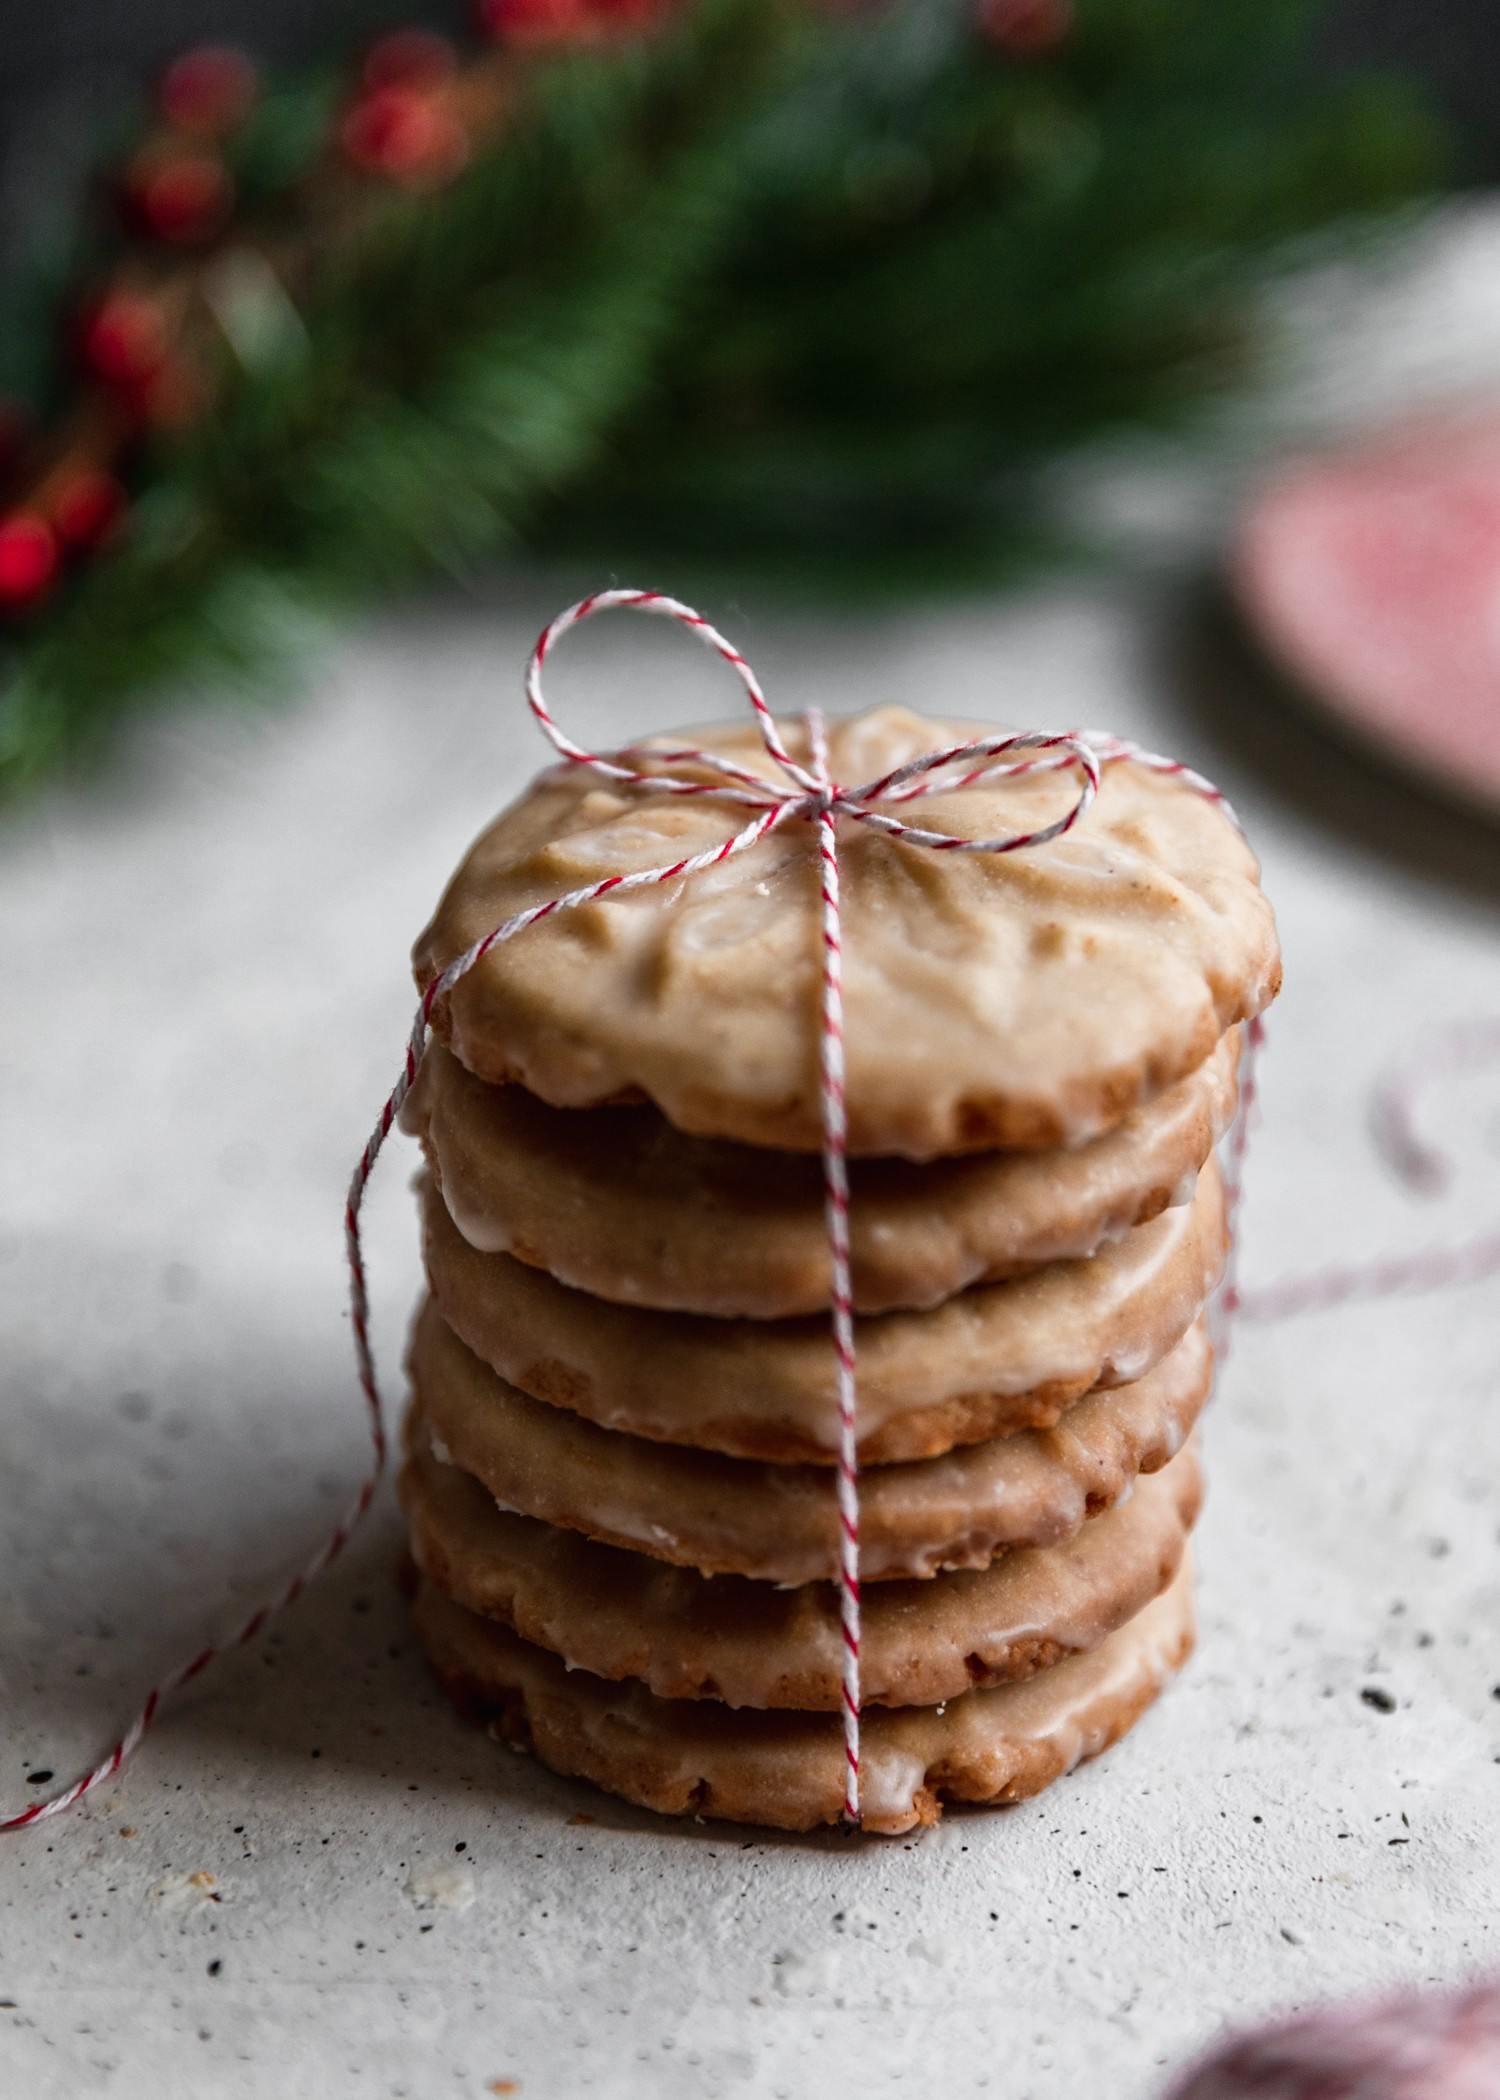 A side image of a stack of eggnog cookies tied with string on a white background with green pine branches and a red plate in the background.